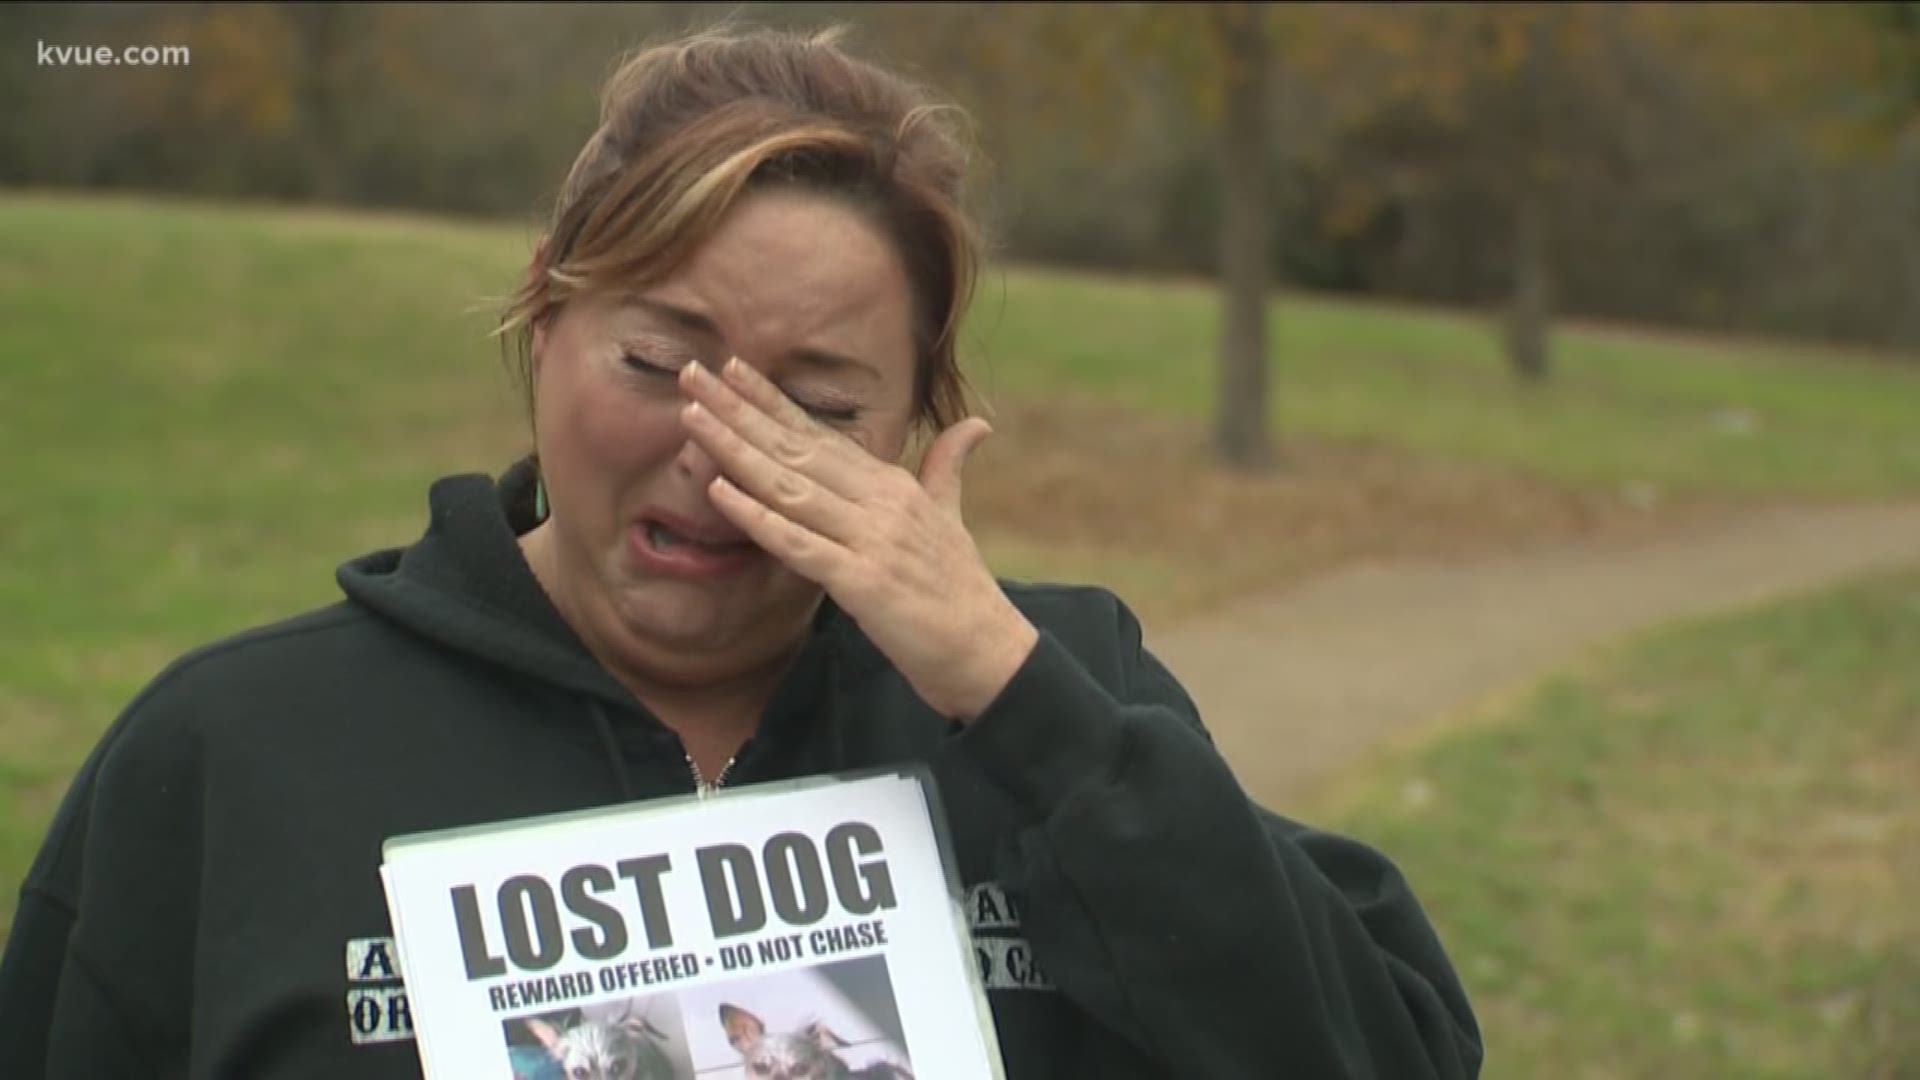 An Austin dog owner is hoping her dog comes home safely.